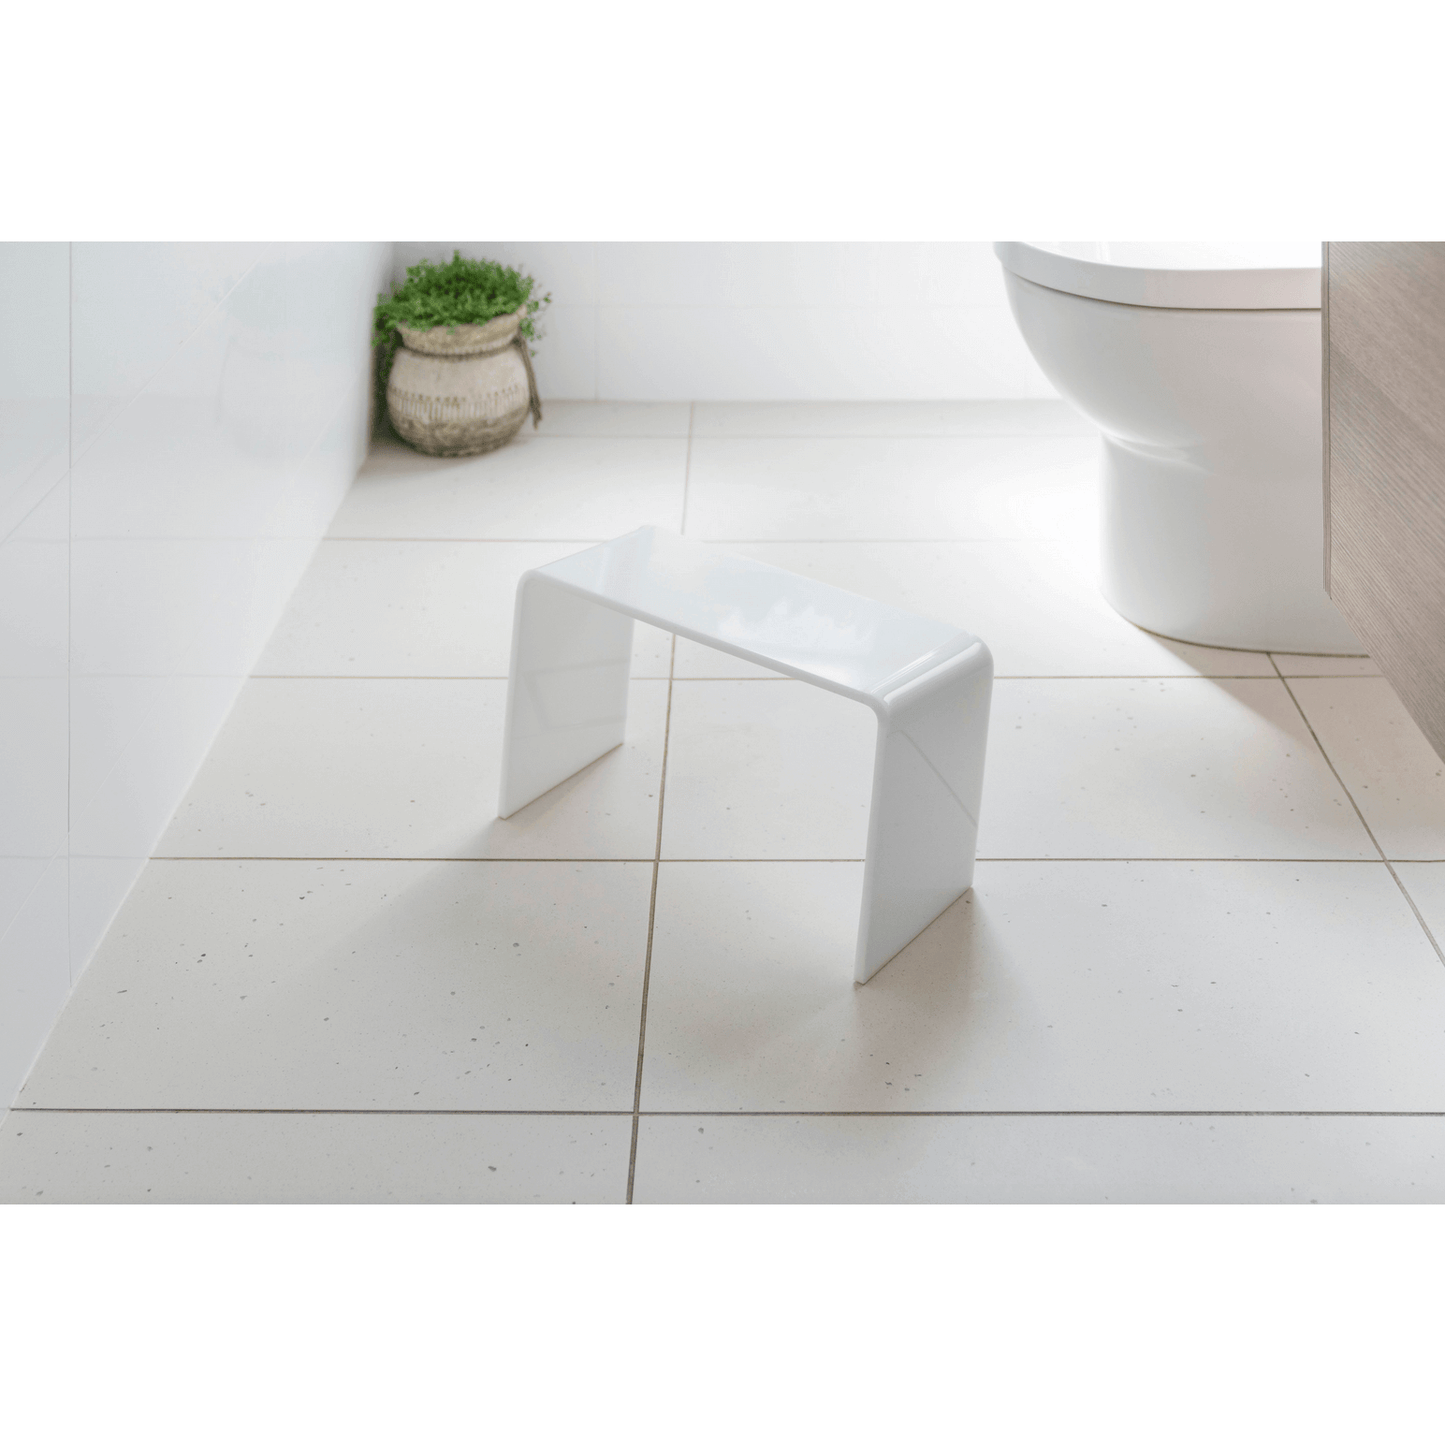 The PROPPR Acer - White Toilet Foot Stool - side angled view in a bathroom